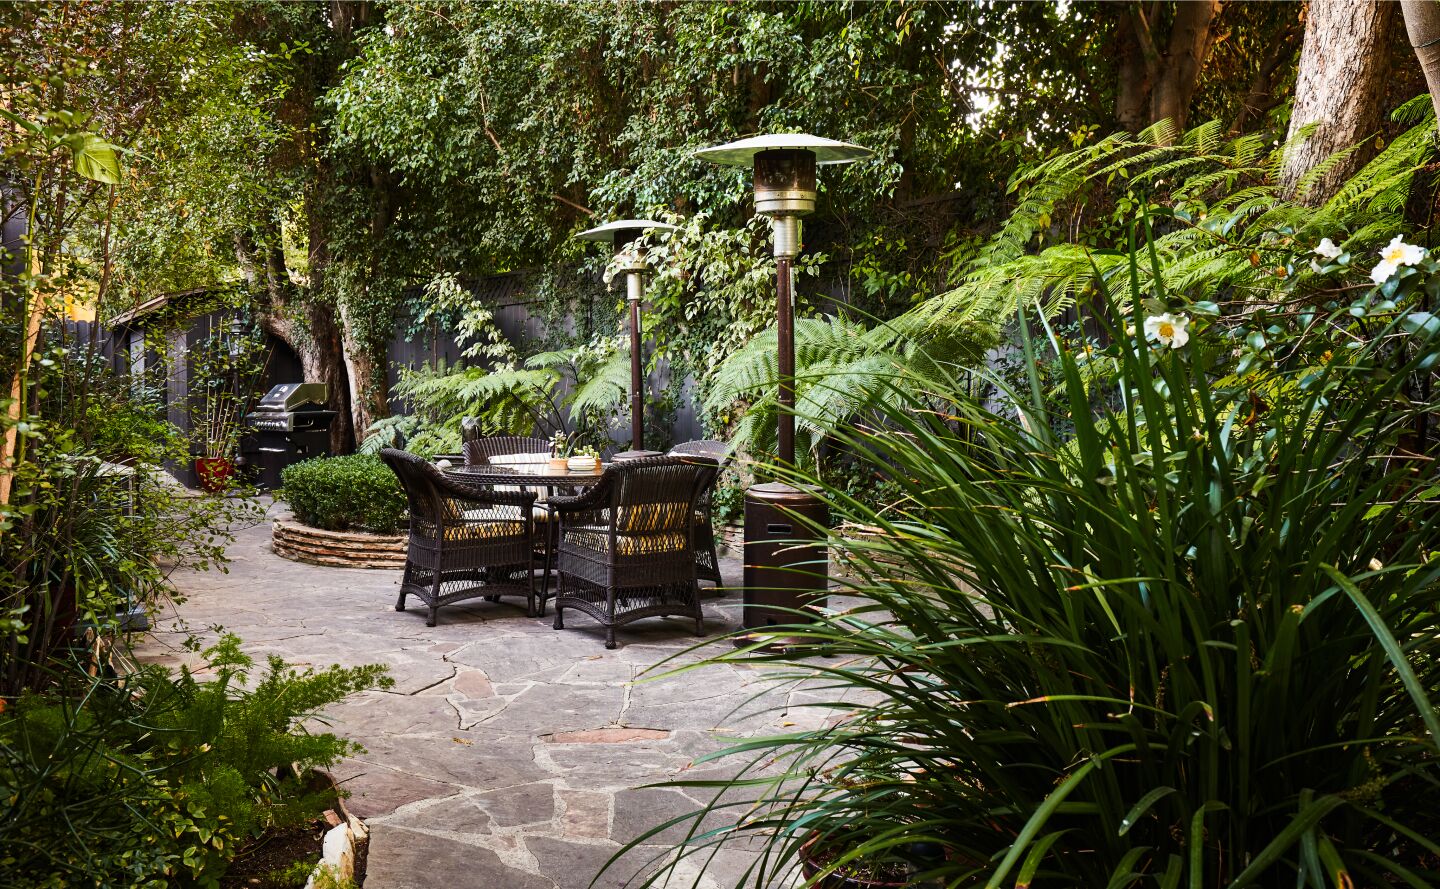 Dense landscaping surrounds a small dining area in the back.